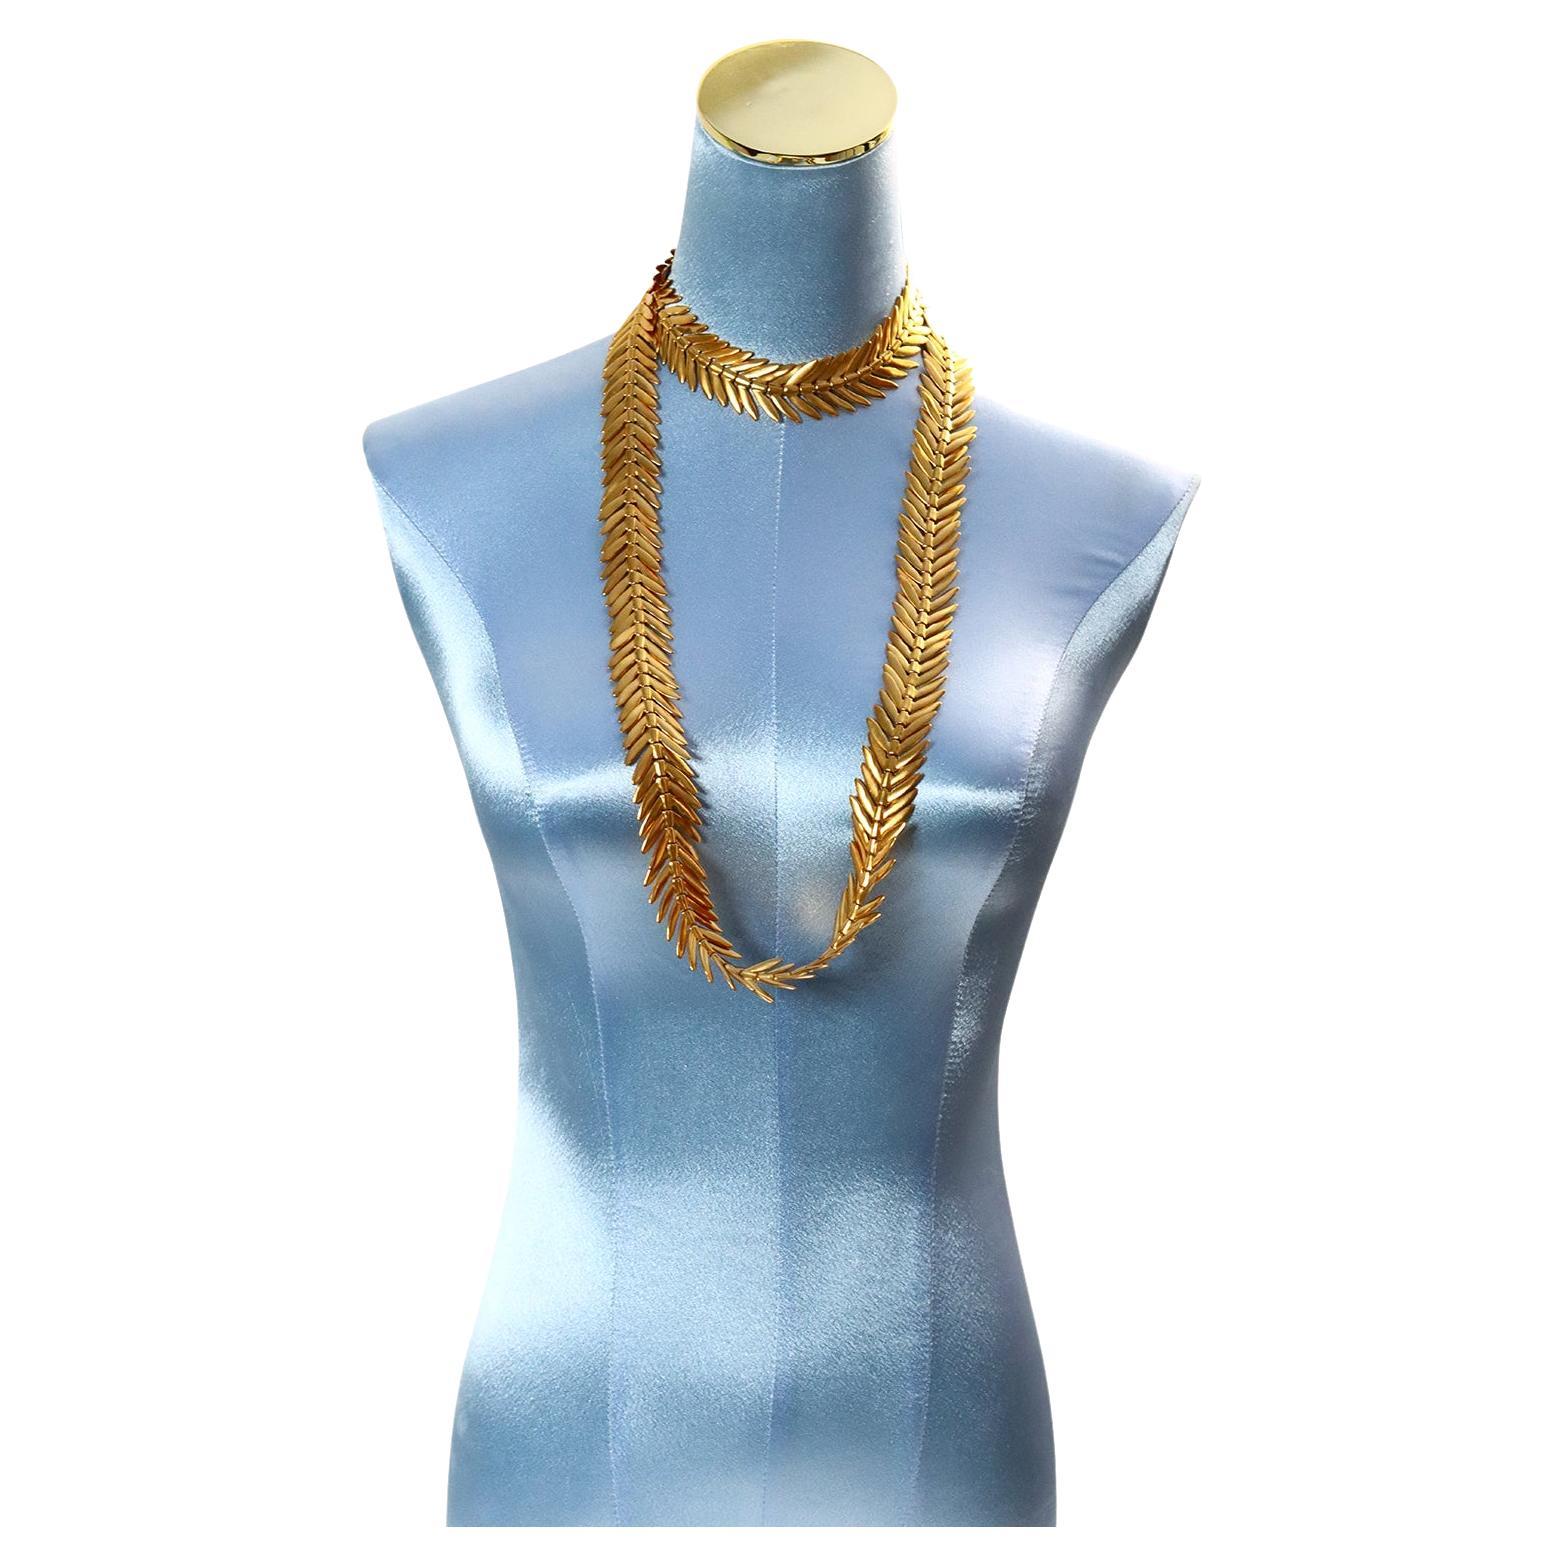 Vintage Anne Klein Arrow Like Gold Tone Long Necklace.  This can be worn doubled, tripled and doubled with the necklace against your neck as shown by my photos. Anne Klein was the designer of the 1980's.  Anne klein jewelry is/was highly coveted as